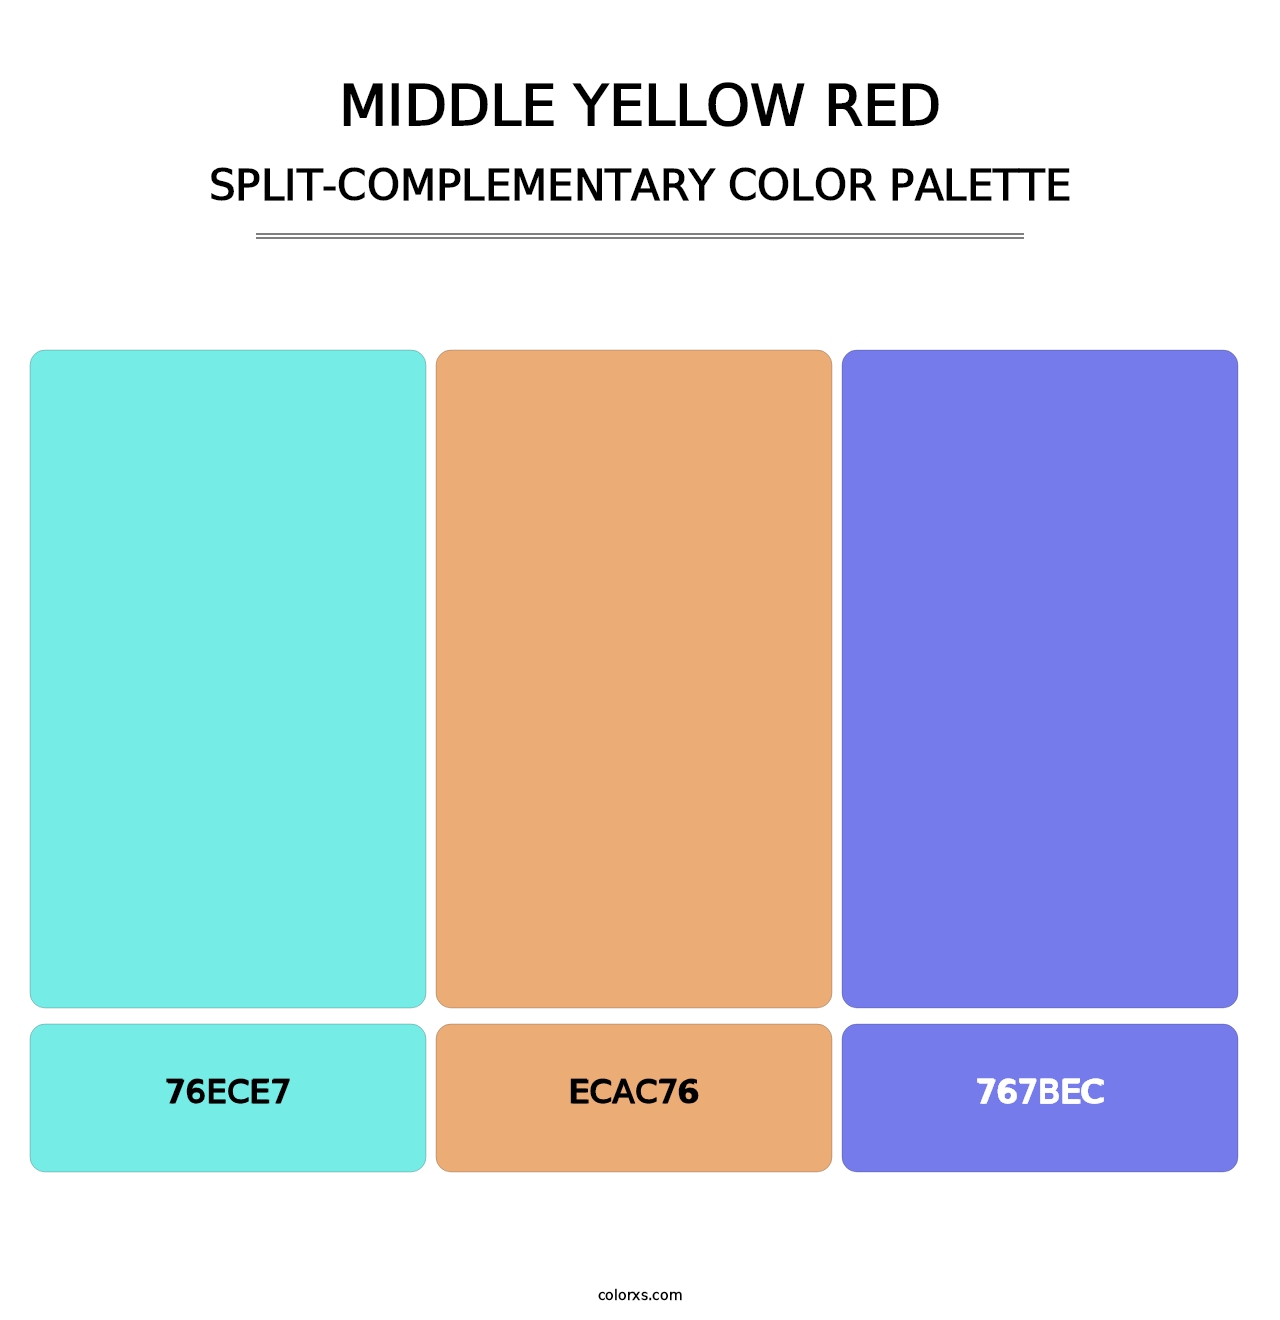 Middle Yellow Red - Split-Complementary Color Palette